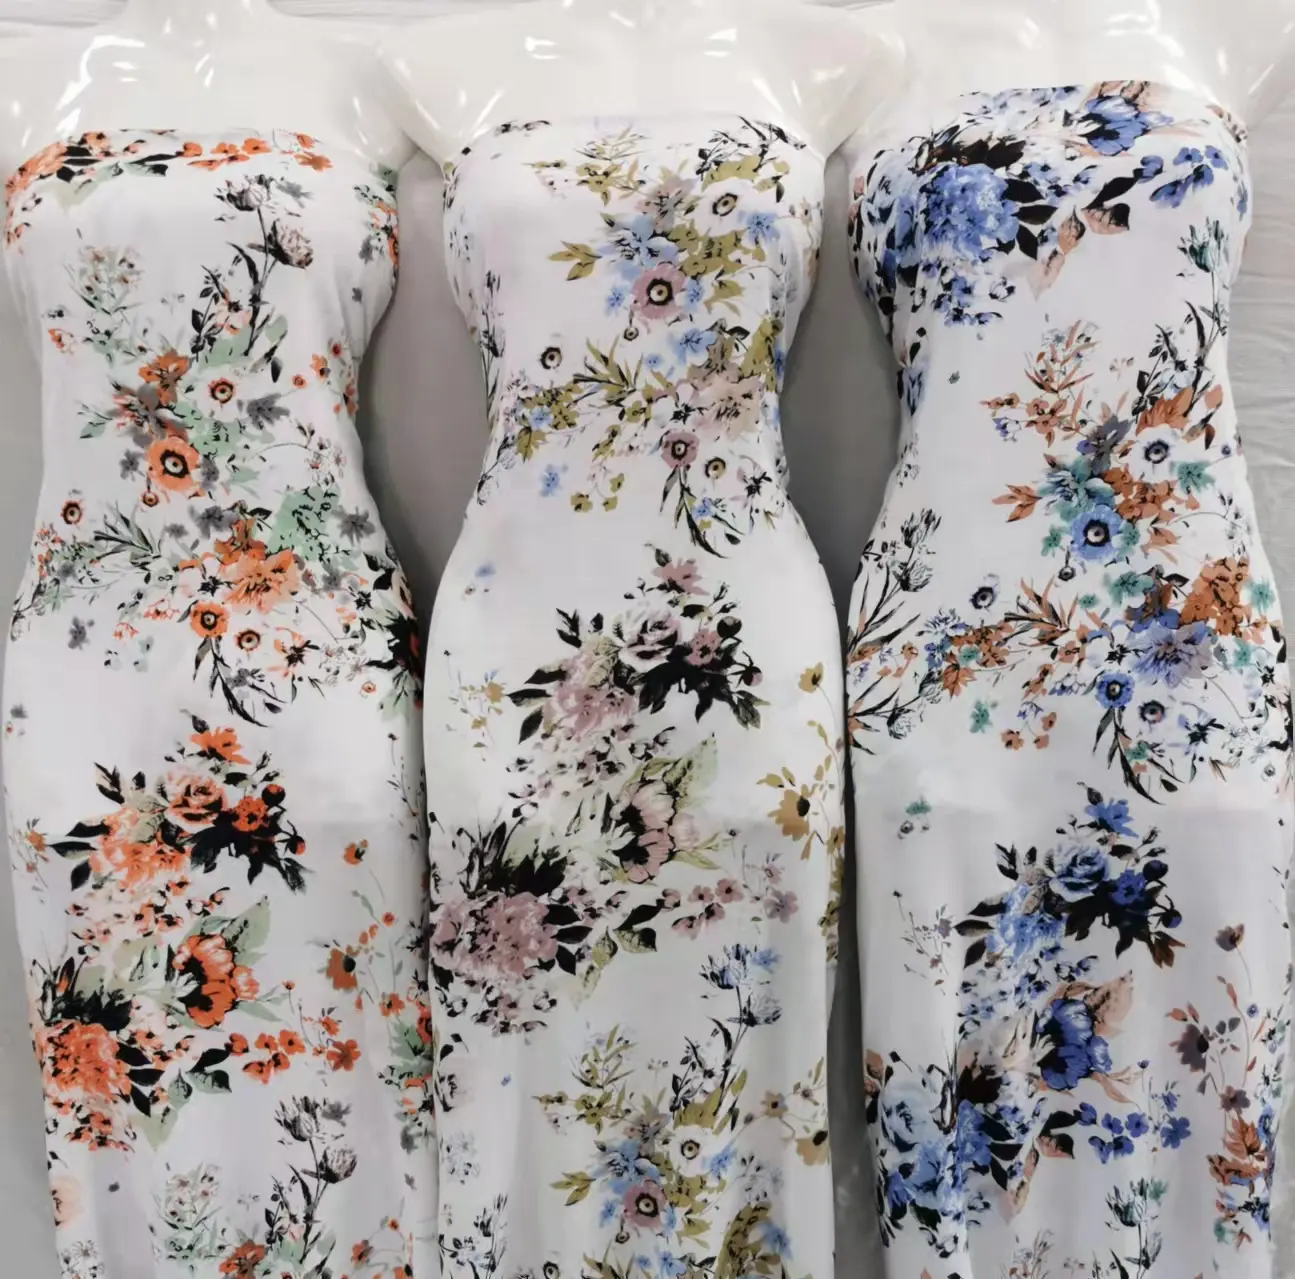 Popular Colorful Comfortable Woven Light Flower Design Printed 100% Rayon Fabric Factory For Women Dress Cheap Price